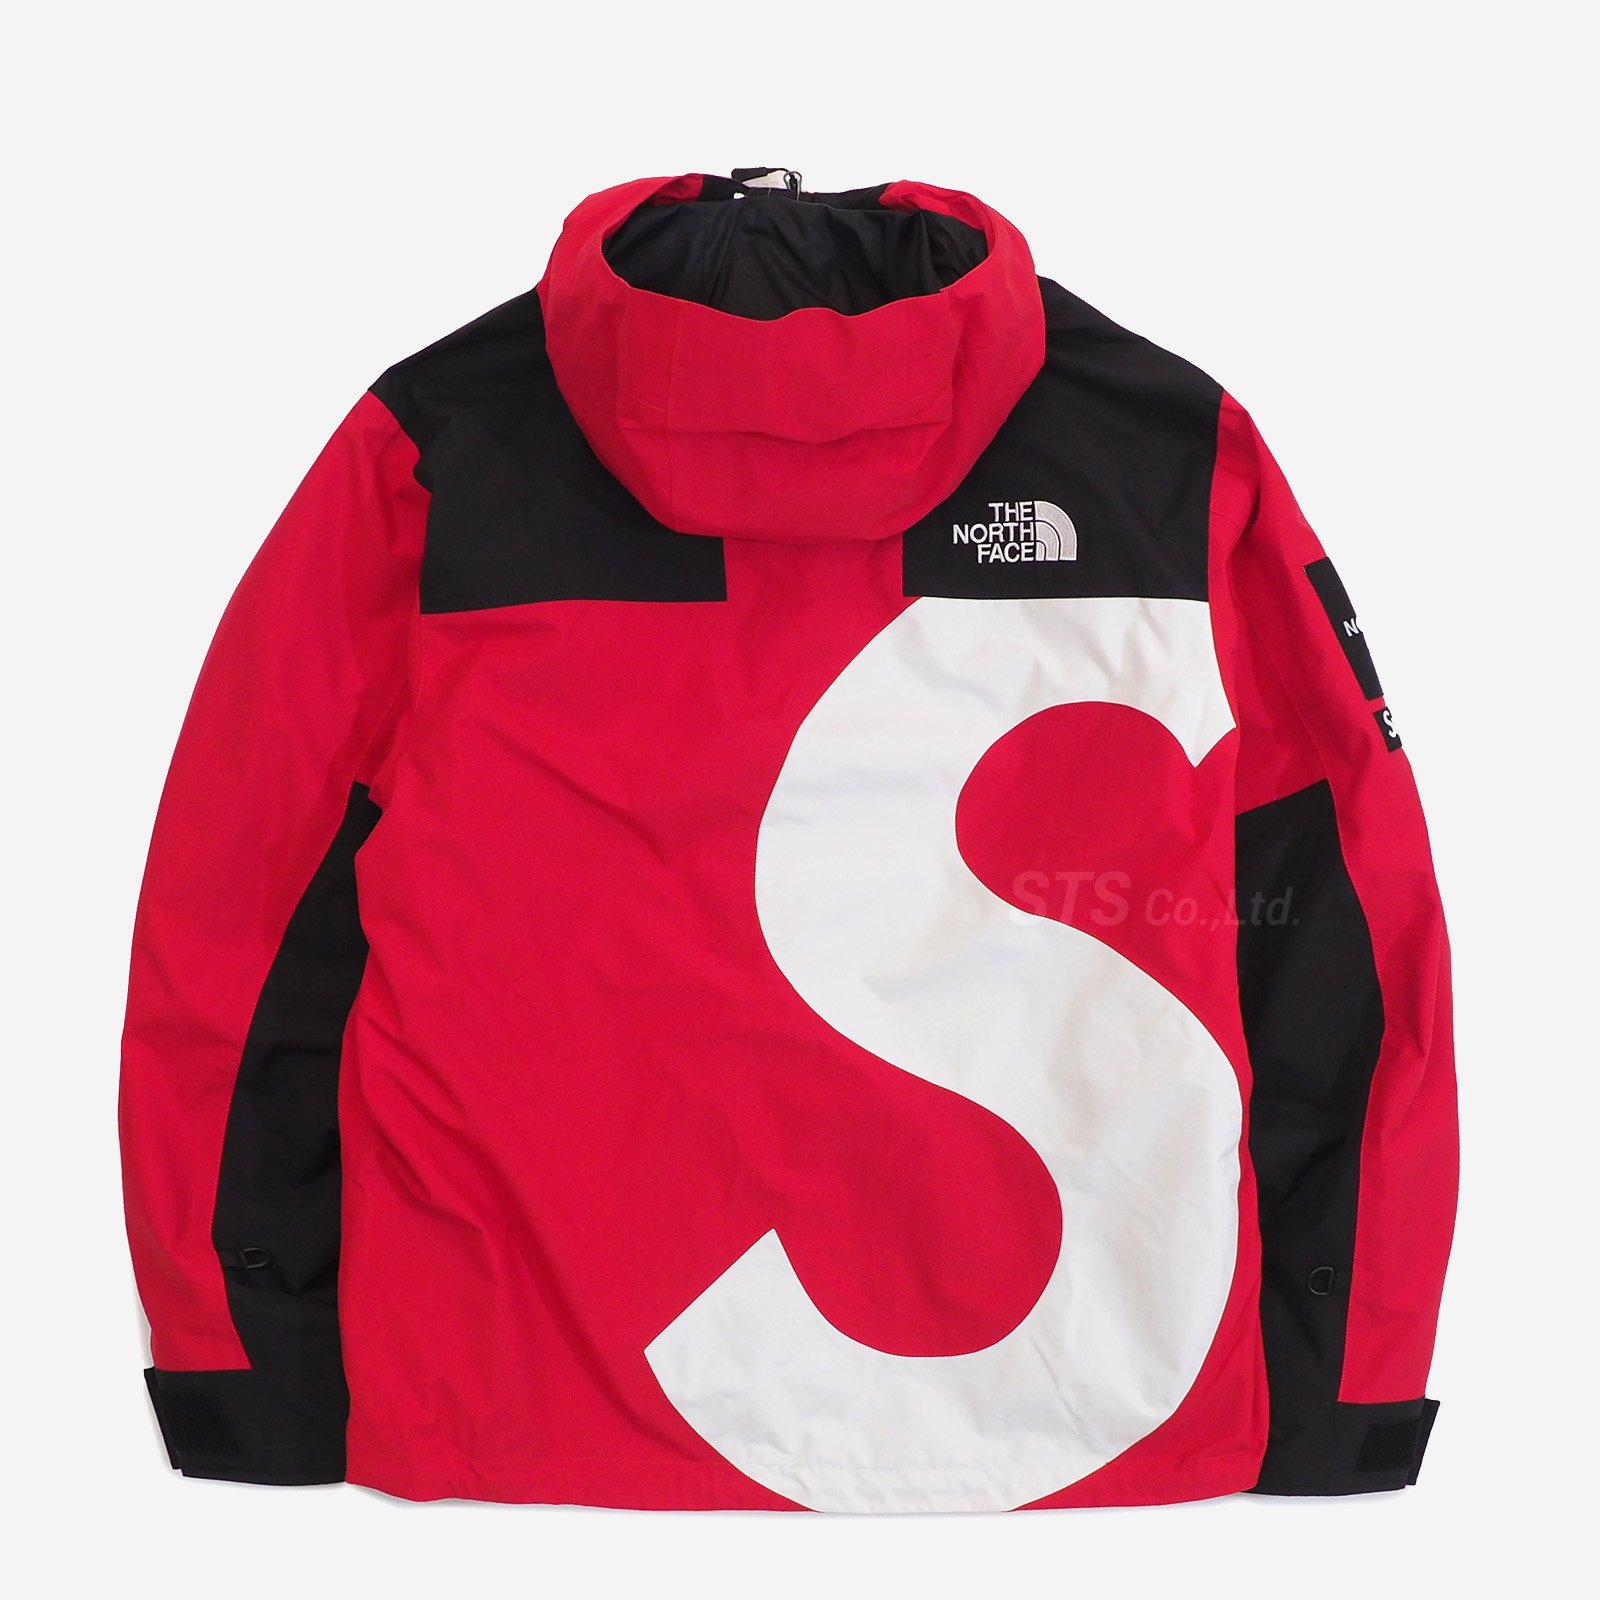 Supreme/The North Face S Logo Mountain Jacket - ParkSIDER